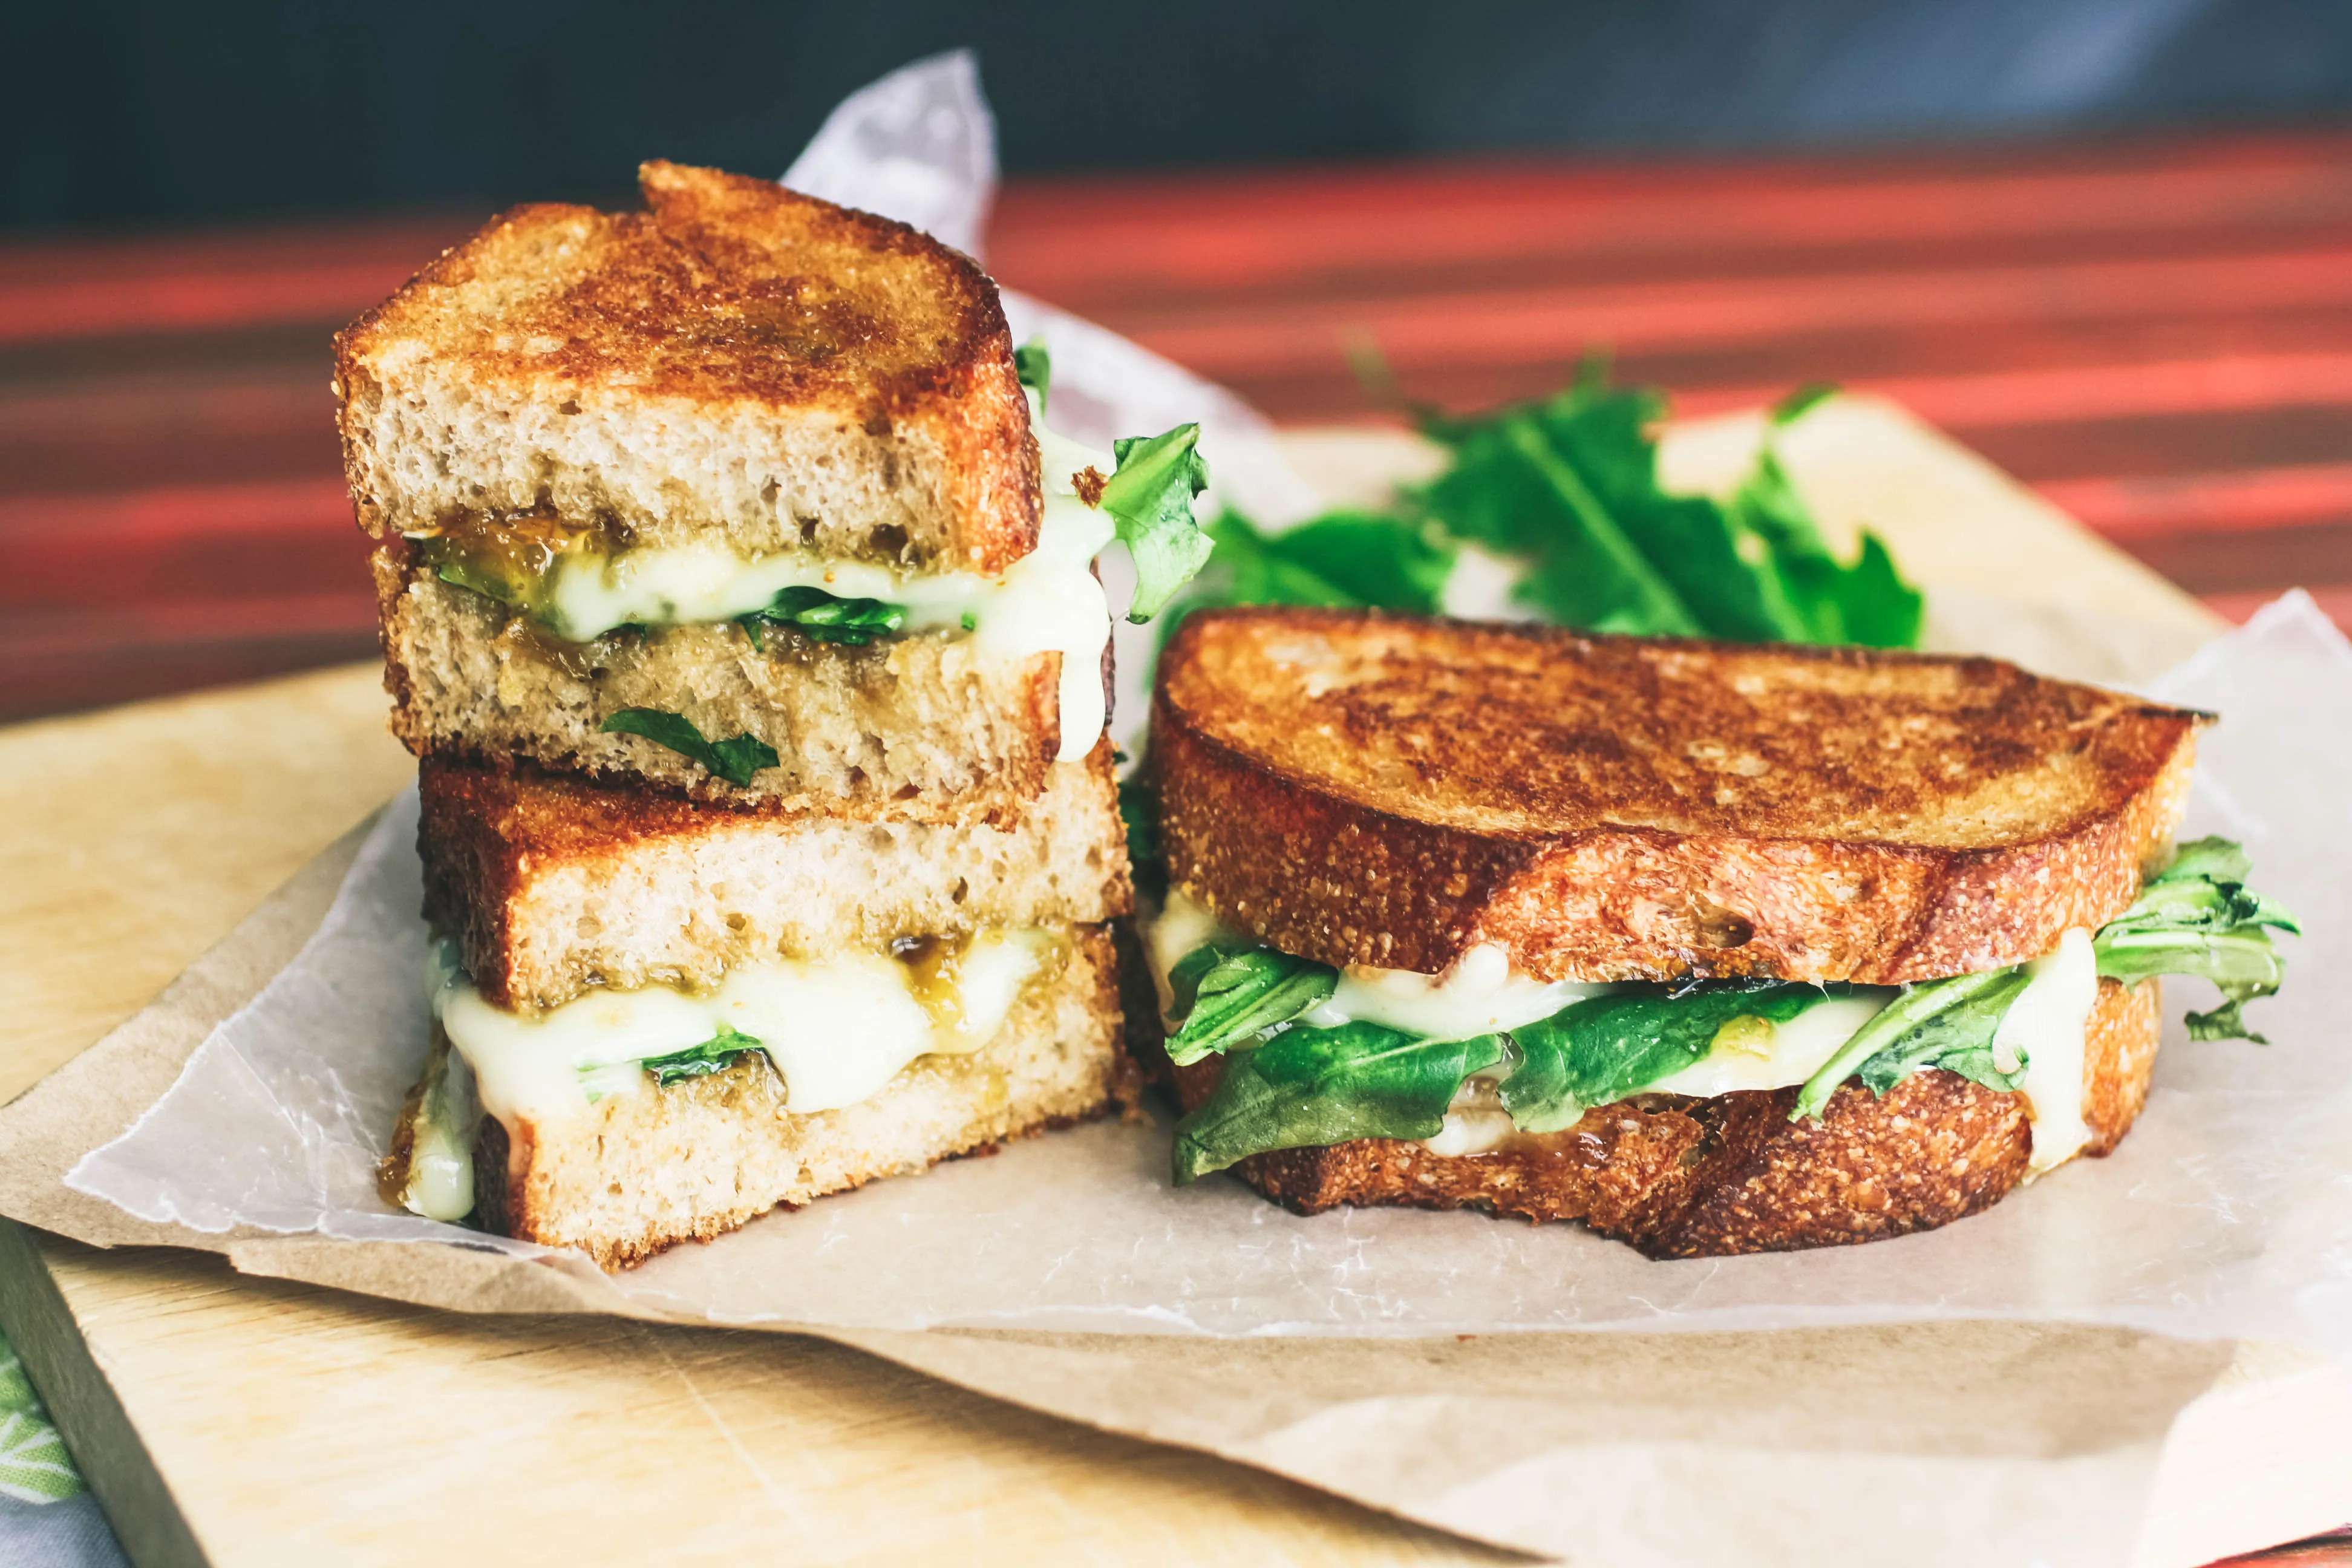 Grilled Brie, Fig Jam, and Dandelion Greens Sandwiches make a flavorful meal! You'll adore how flavorful these Grilled Brie, Fig Jam, and Dandelion Greens Sandwiches are.